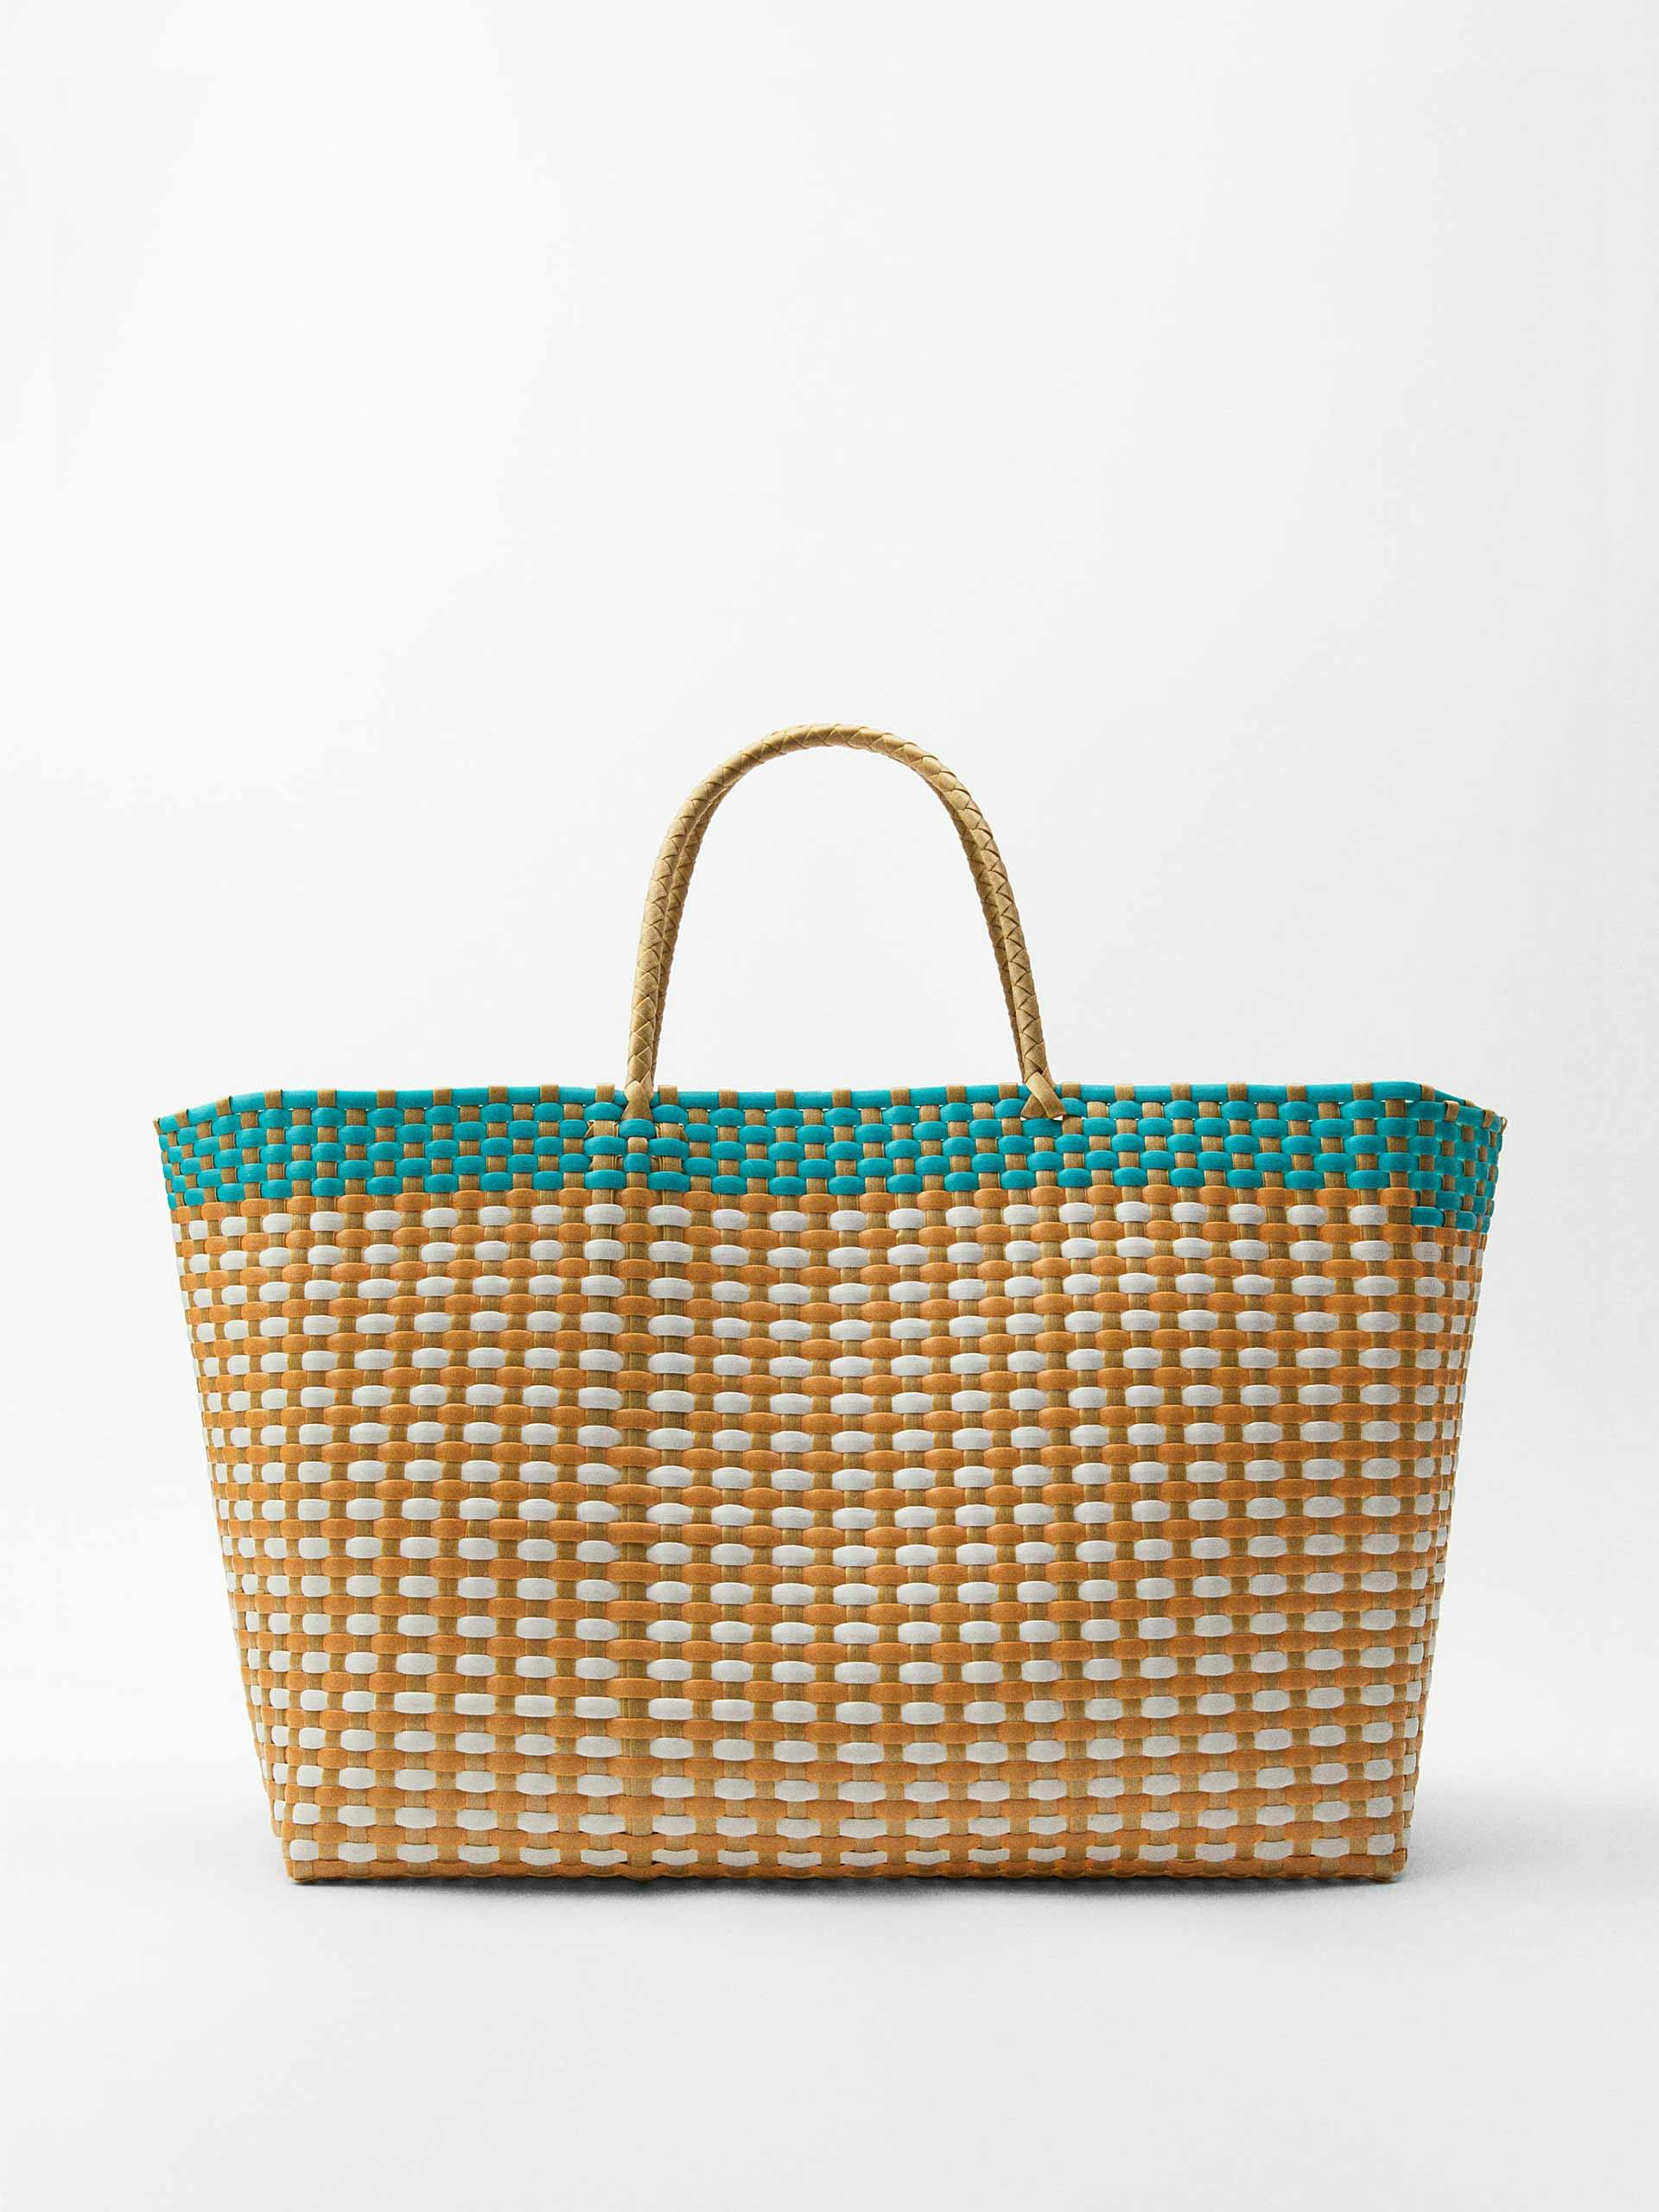 Olive Green woven maxi basket